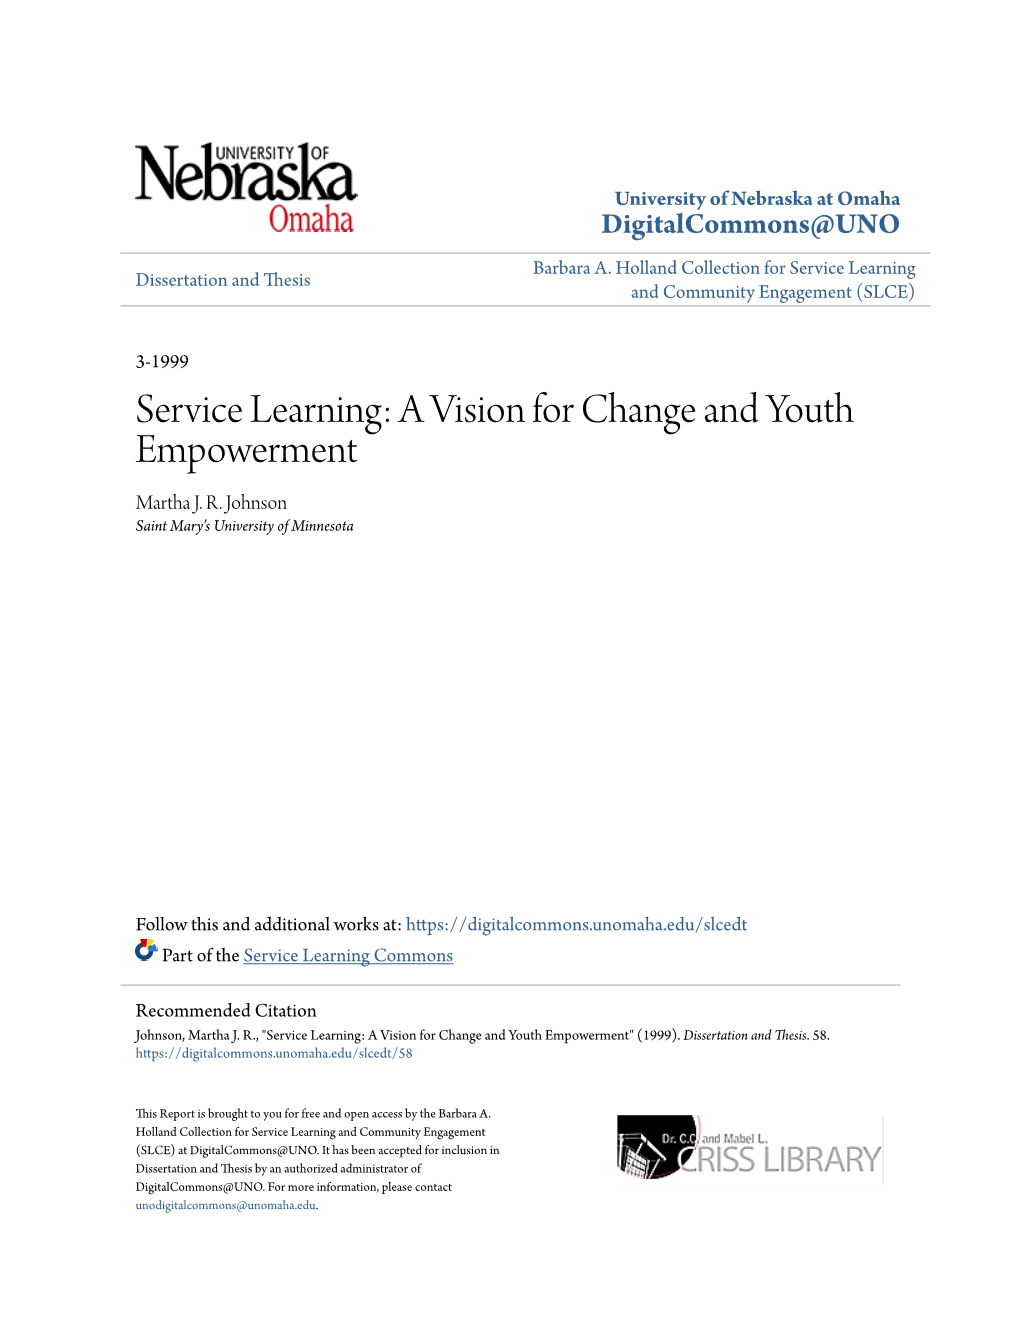 Service Learning: a Vision for Change and Youth Empowerment Martha J